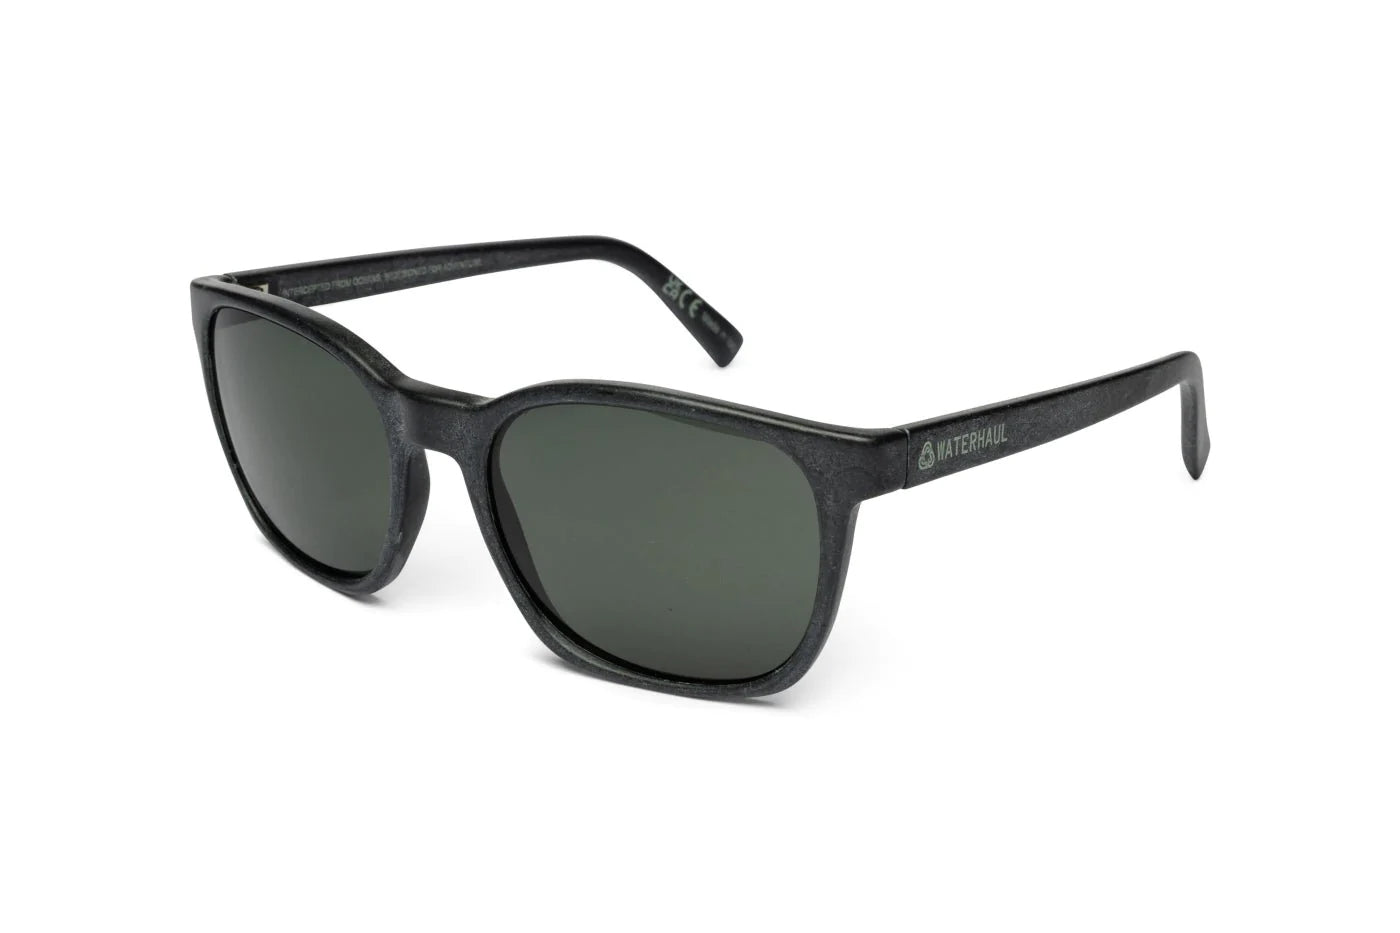 Waterhaul Fitzroy Recycled, Sustainable Sunglasses